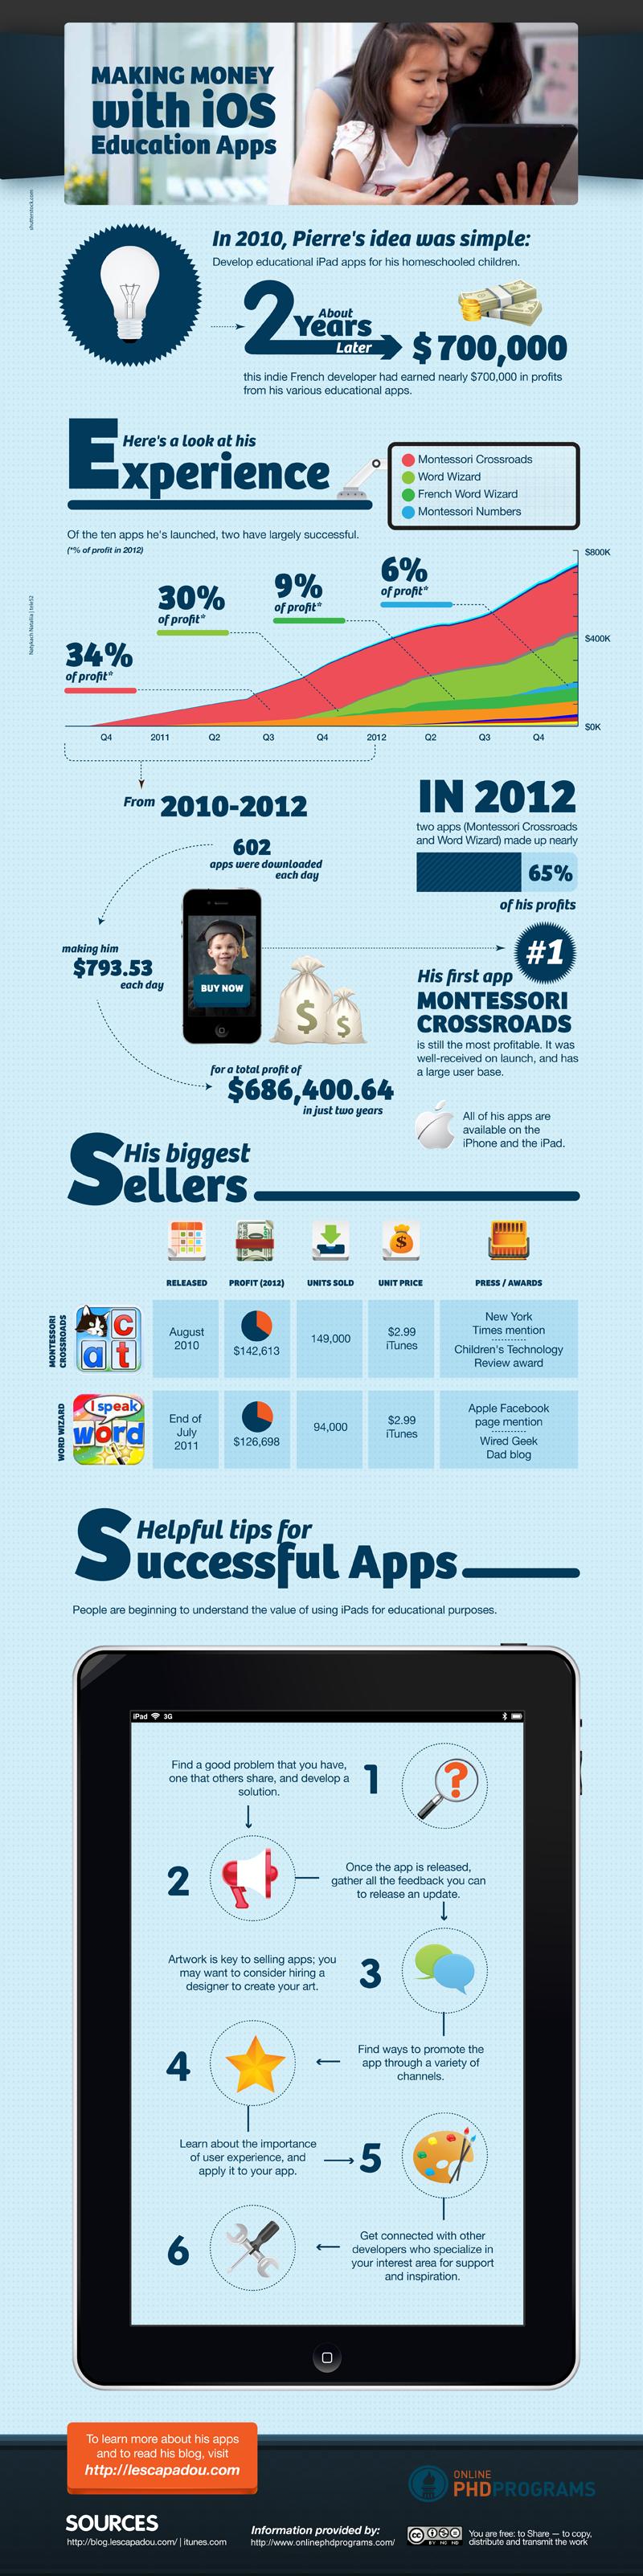 Making Money With iOS Educational Apps (Infographic)